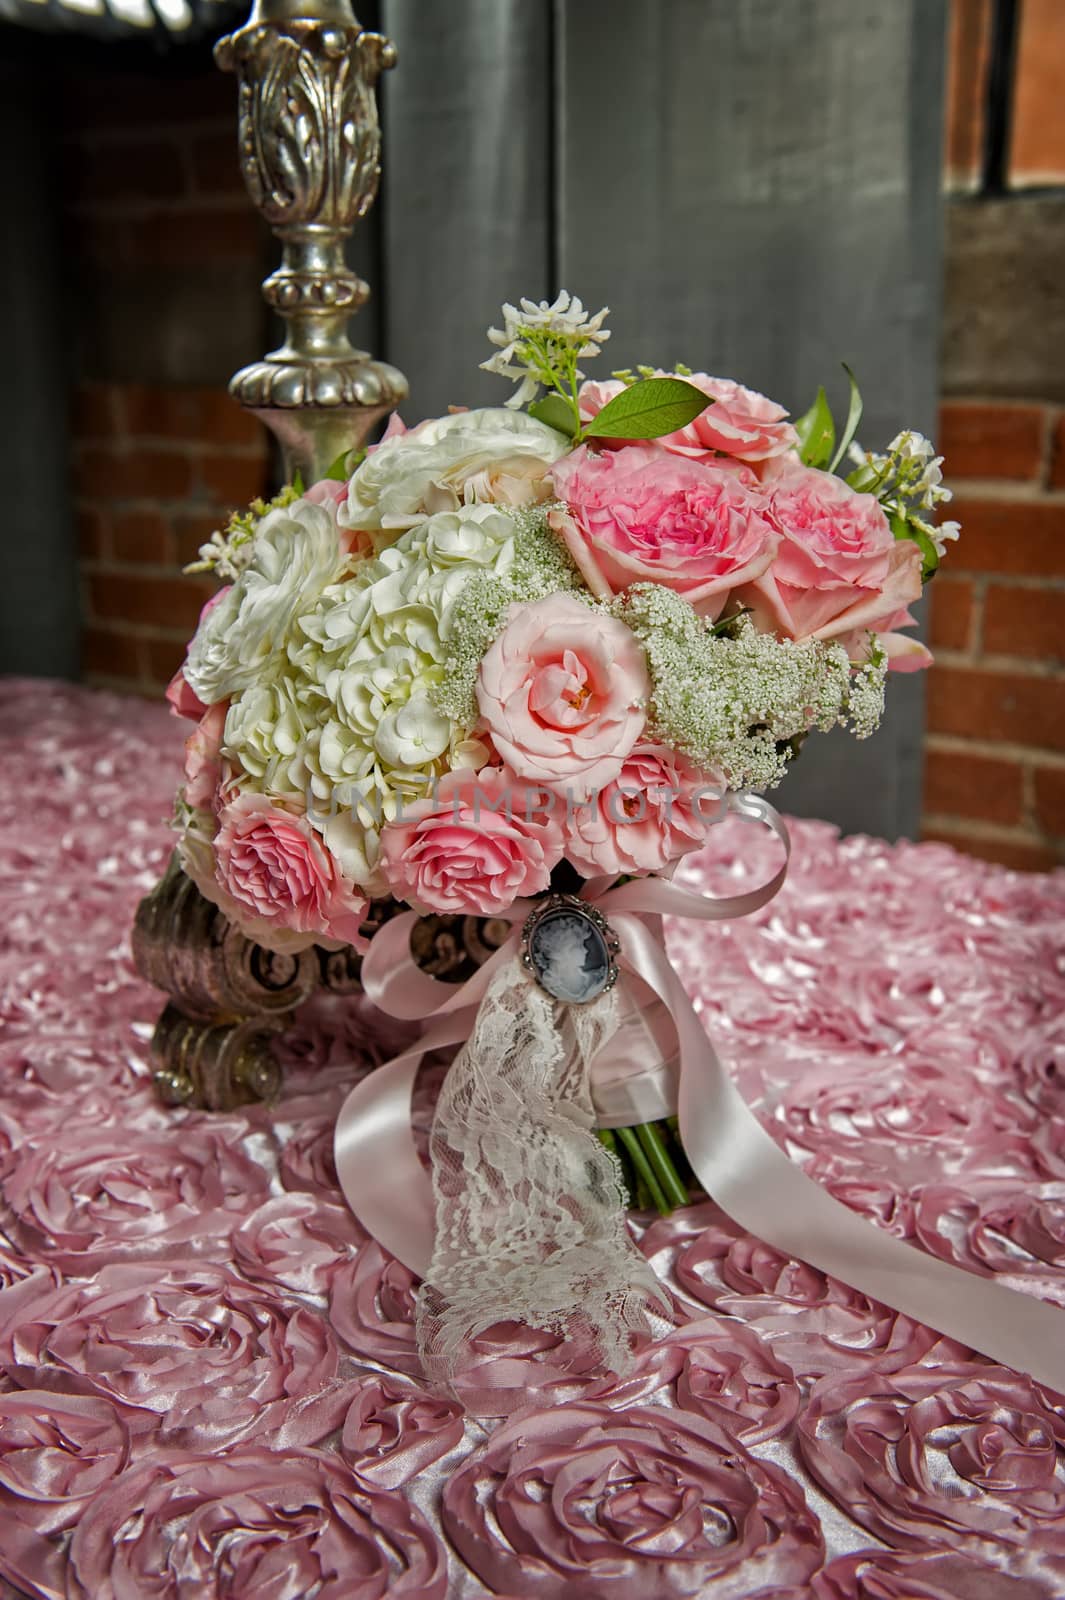 Image of a bride's wedding bouquet on a pink cloth